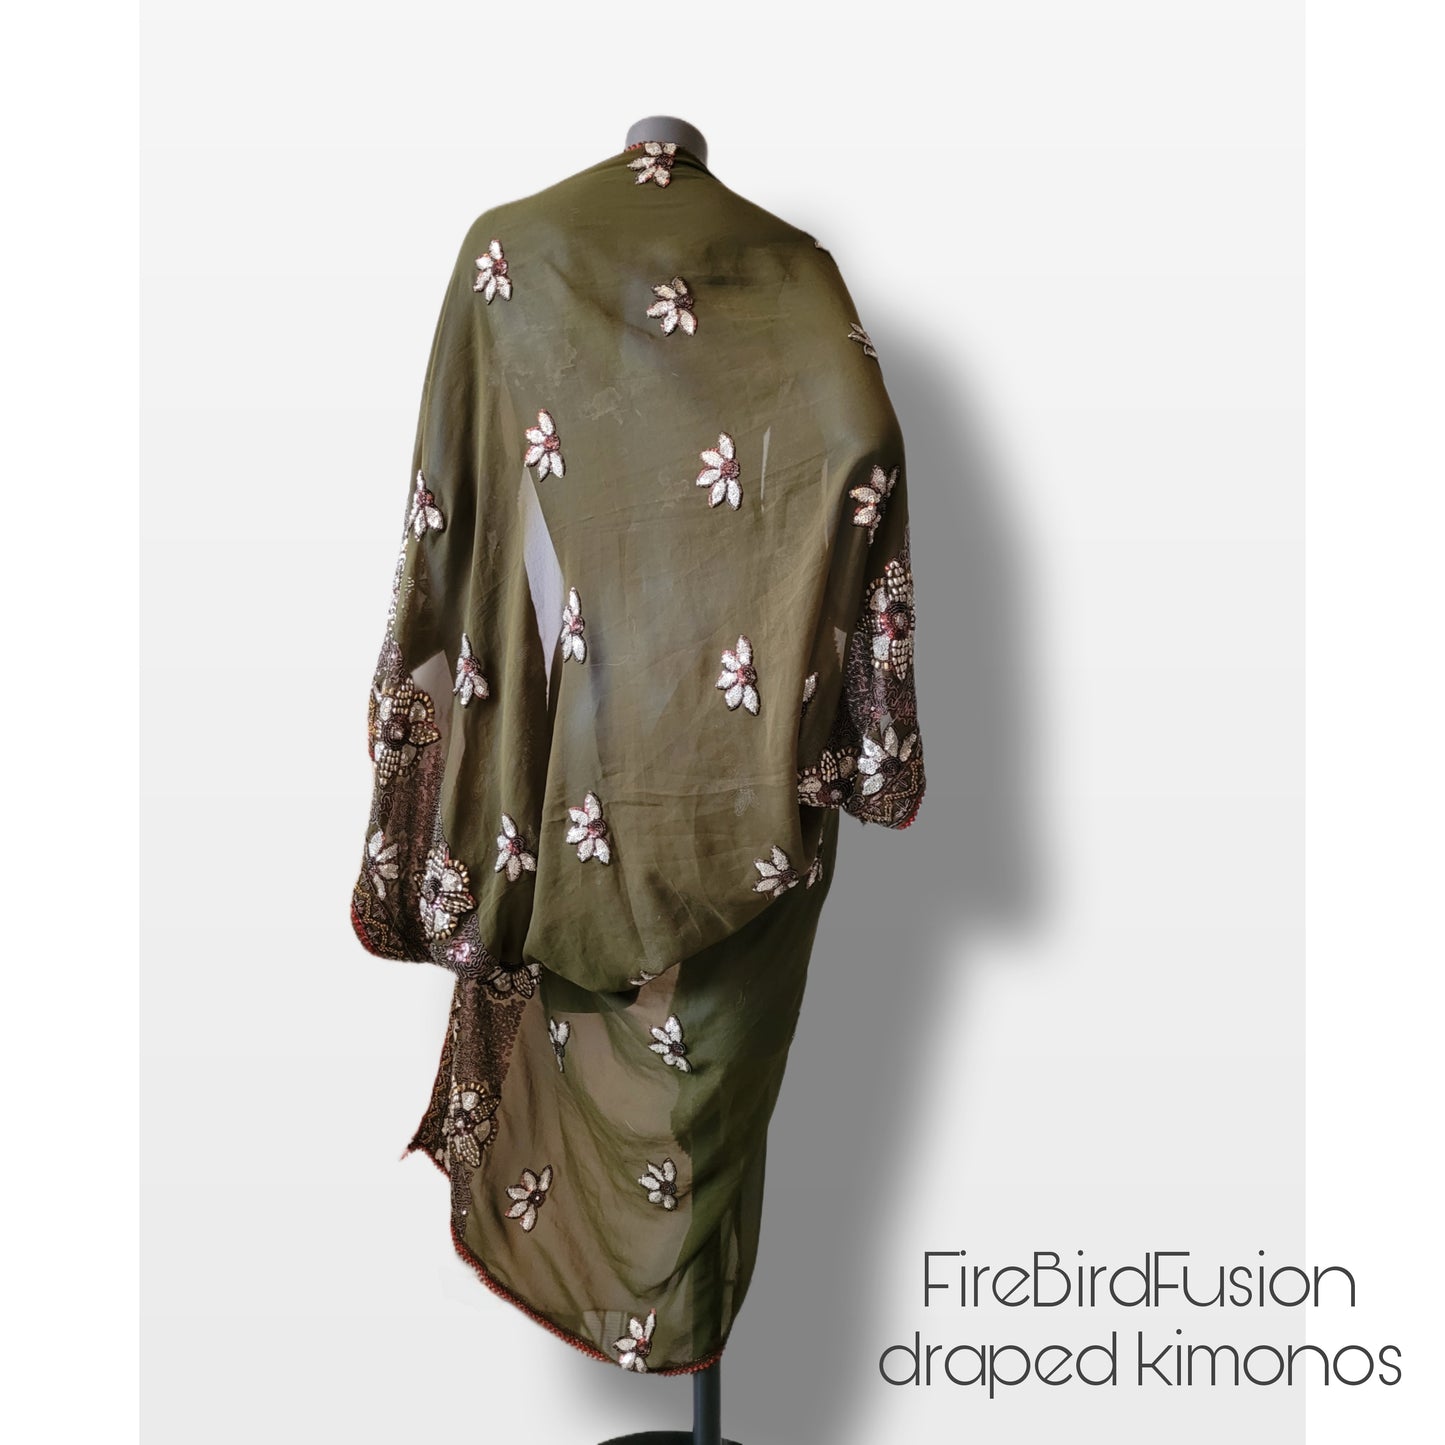 Draped kimono in light olive green with golden shine and broad embroidered trim in wine red, silver and bronze (M-L)